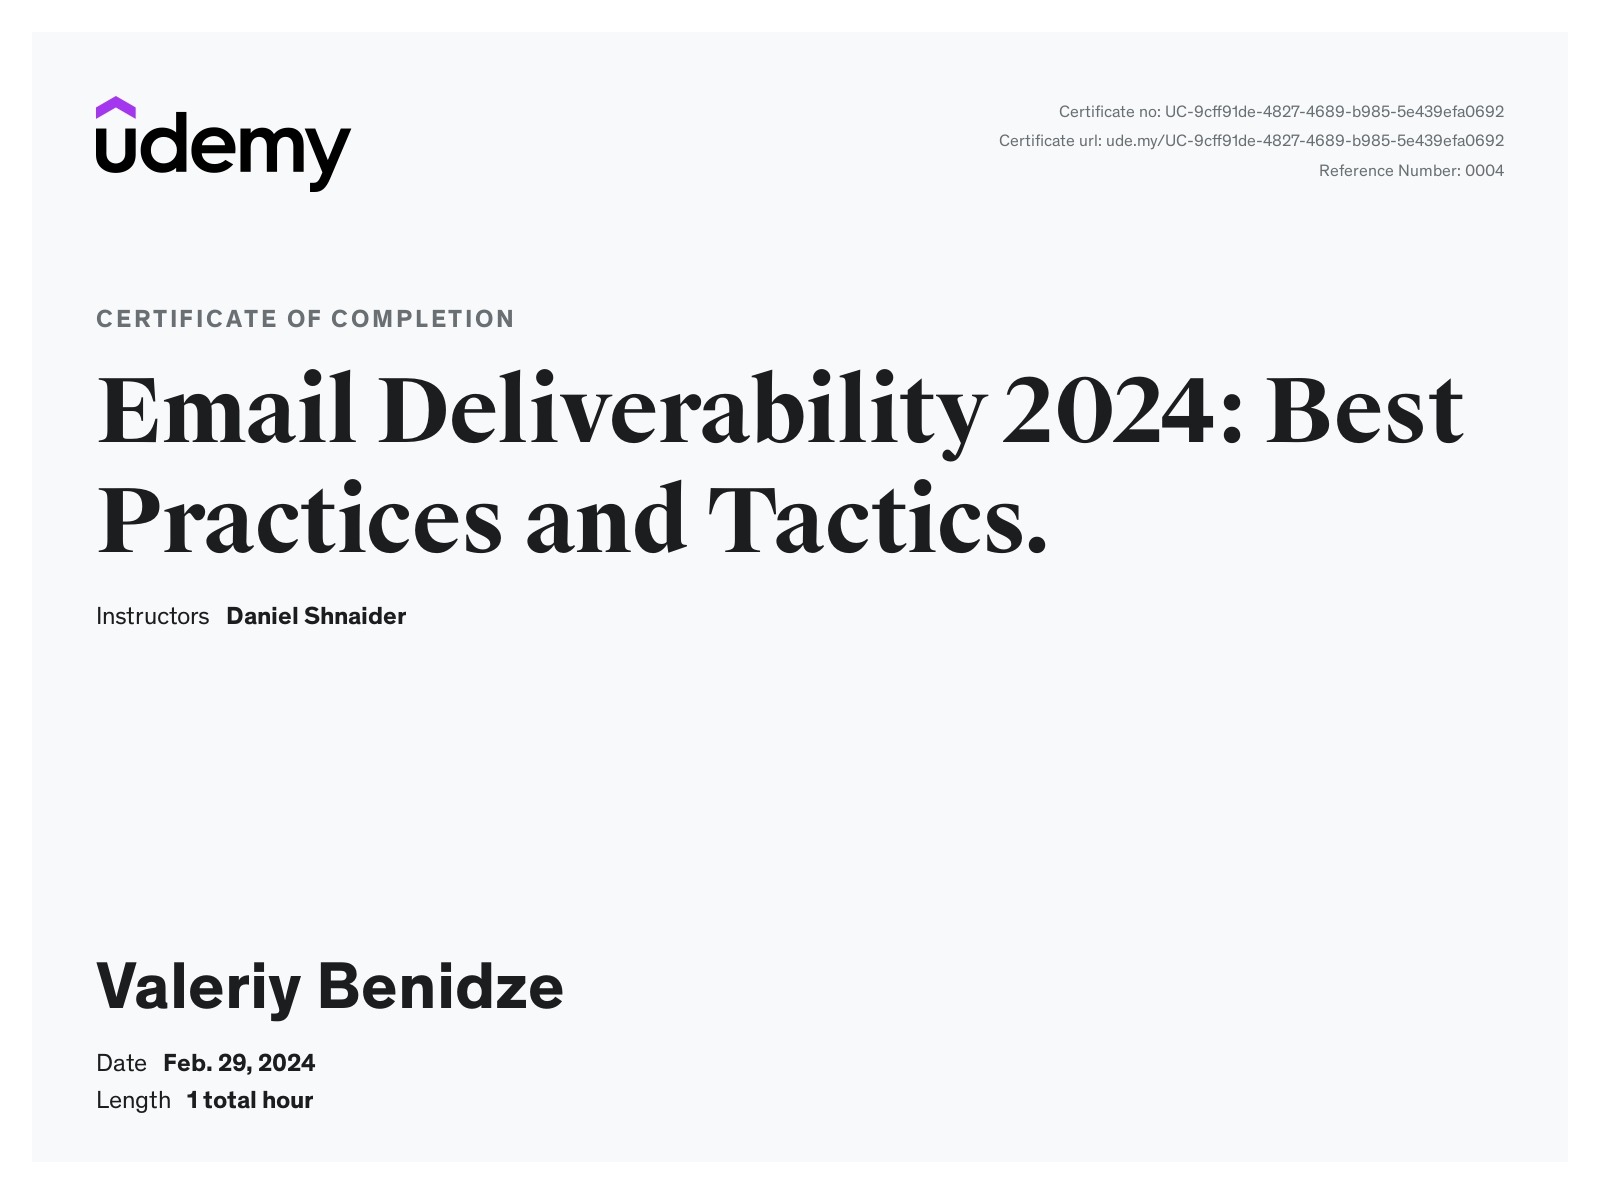 Email Deliverability 2024: Best practices and tactics certificate